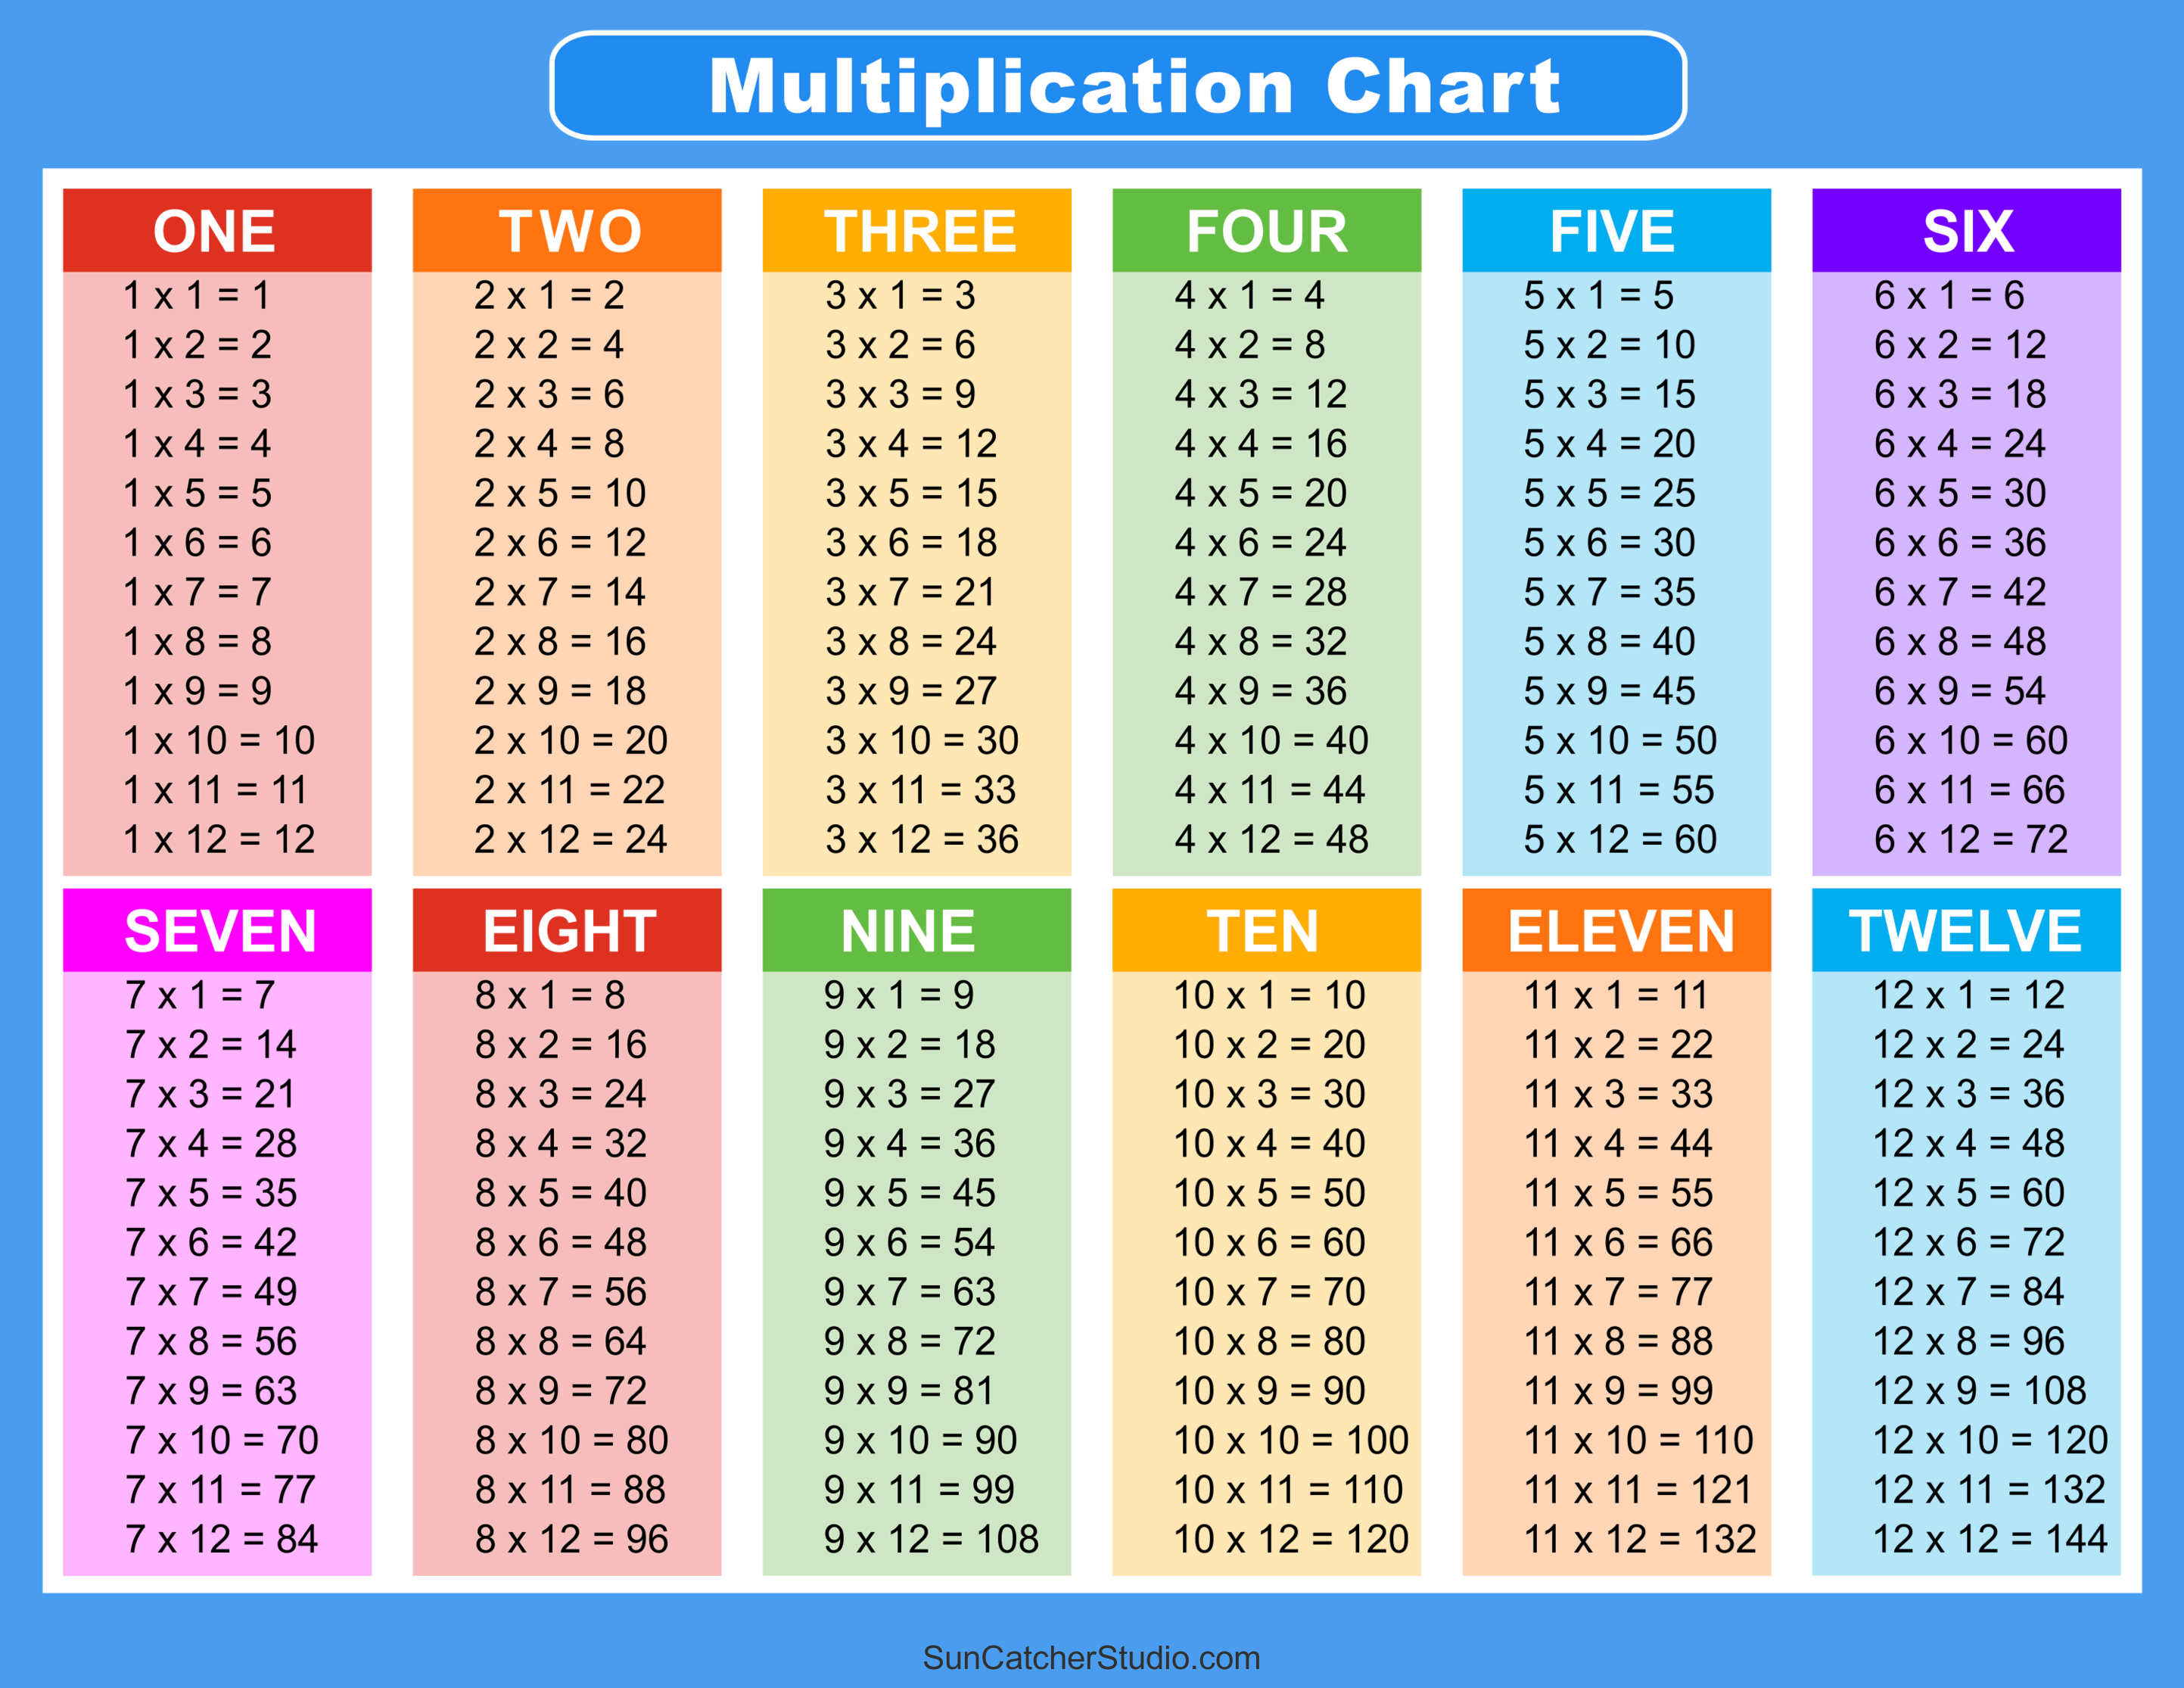 Multiplication Charts (PDF): Free Printable Times Tables – DIY Projects,  Patterns, Monograms, Designs, Templates